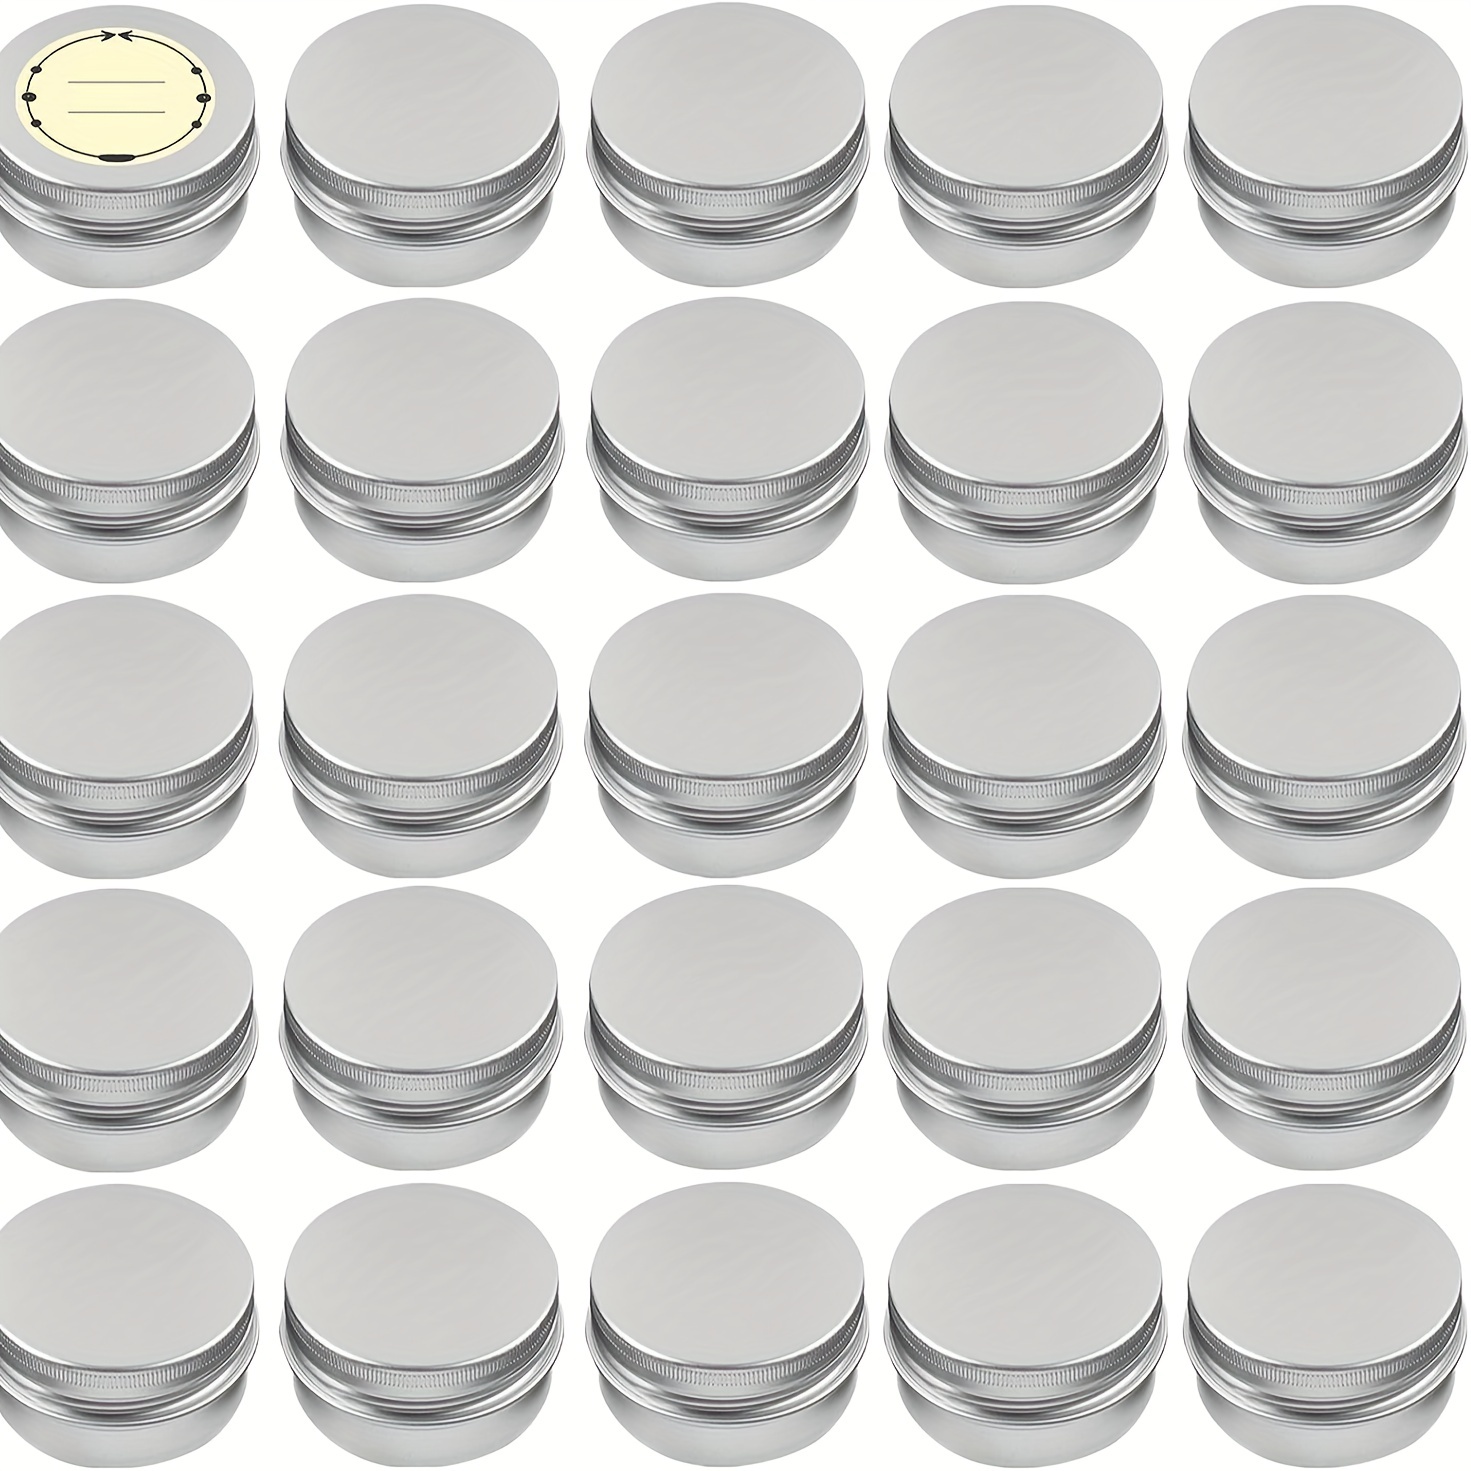 

24pack Aluminum Tin Cans With Screw Lid And Labels, 0.5/1/2 Oz Refillable Travel Sized Cosmetic Containers Small Tins For Salves, Lotion Bars, Beard Balms, Candles